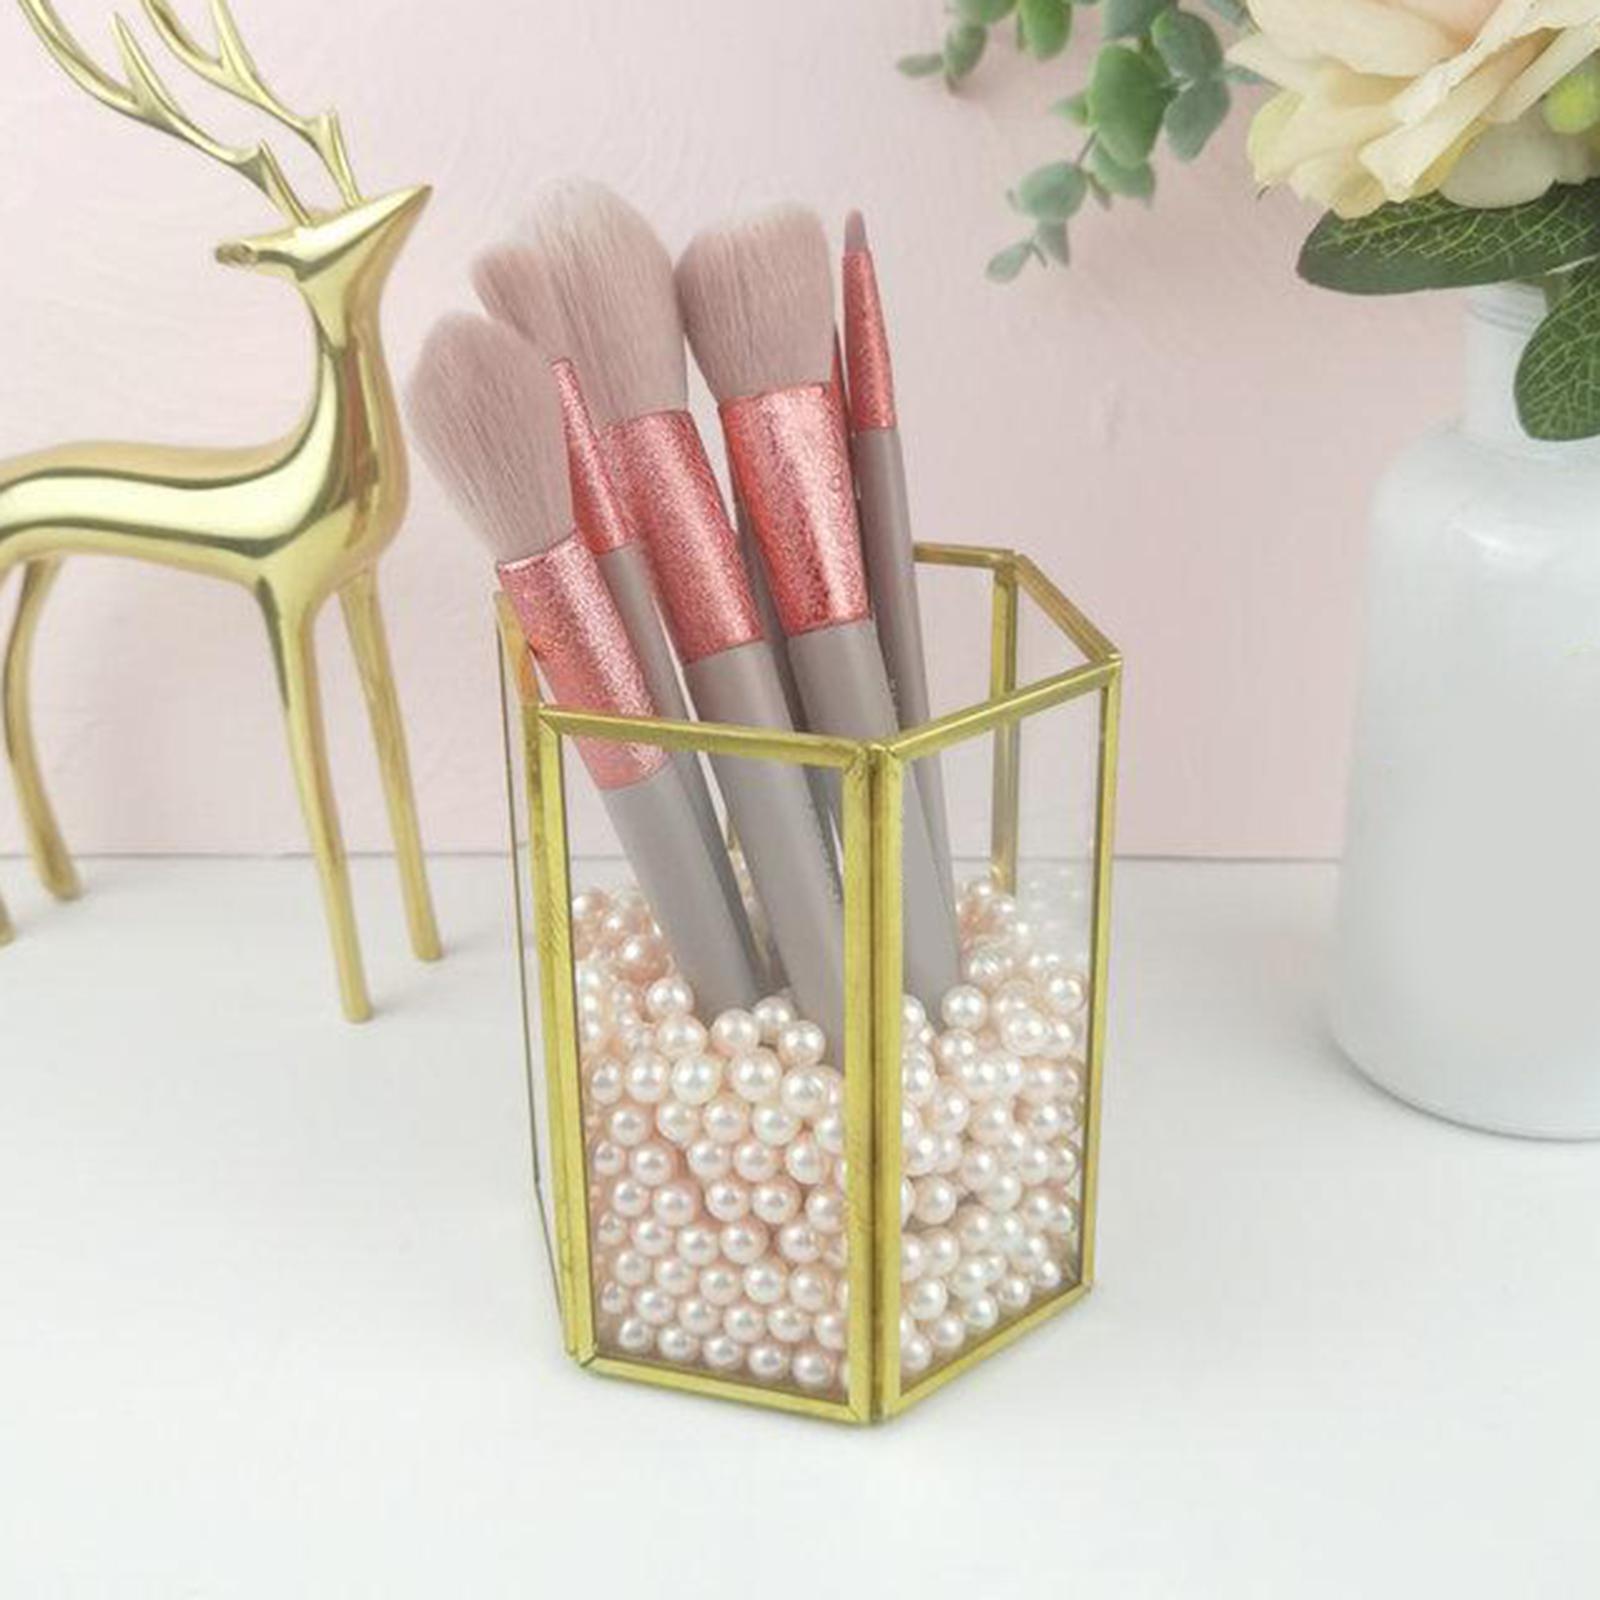 Glass Beauty Box Makeup Brush Holder Cosmetics Storage Container 10x12cm